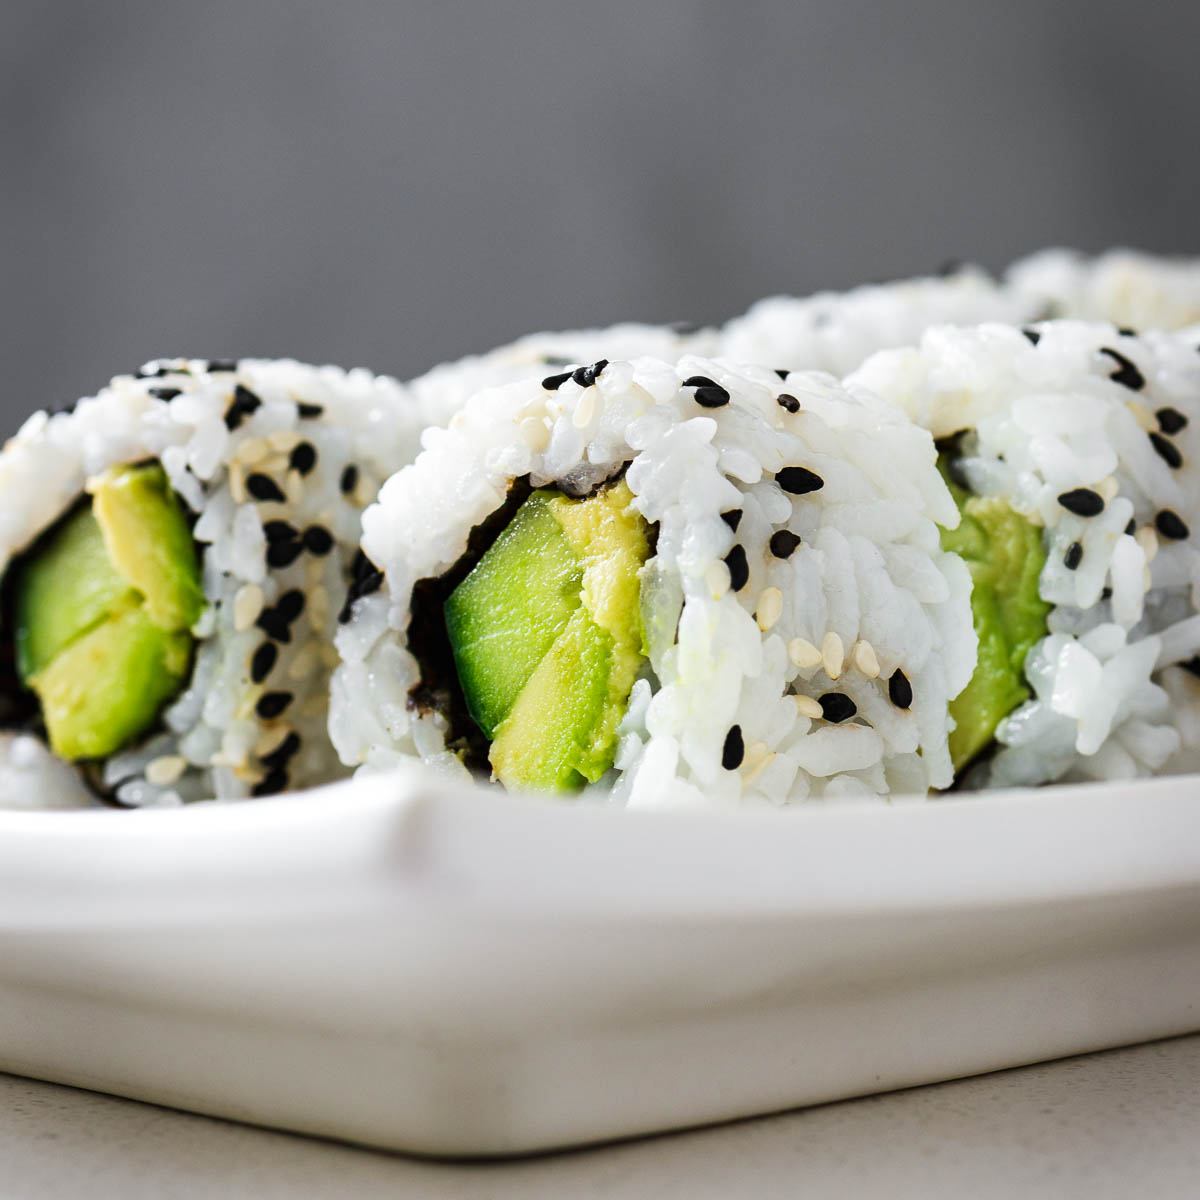 How to Roll Inside-Out Sushi Rolls (Uramaki) - Non-Guilty Pleasures